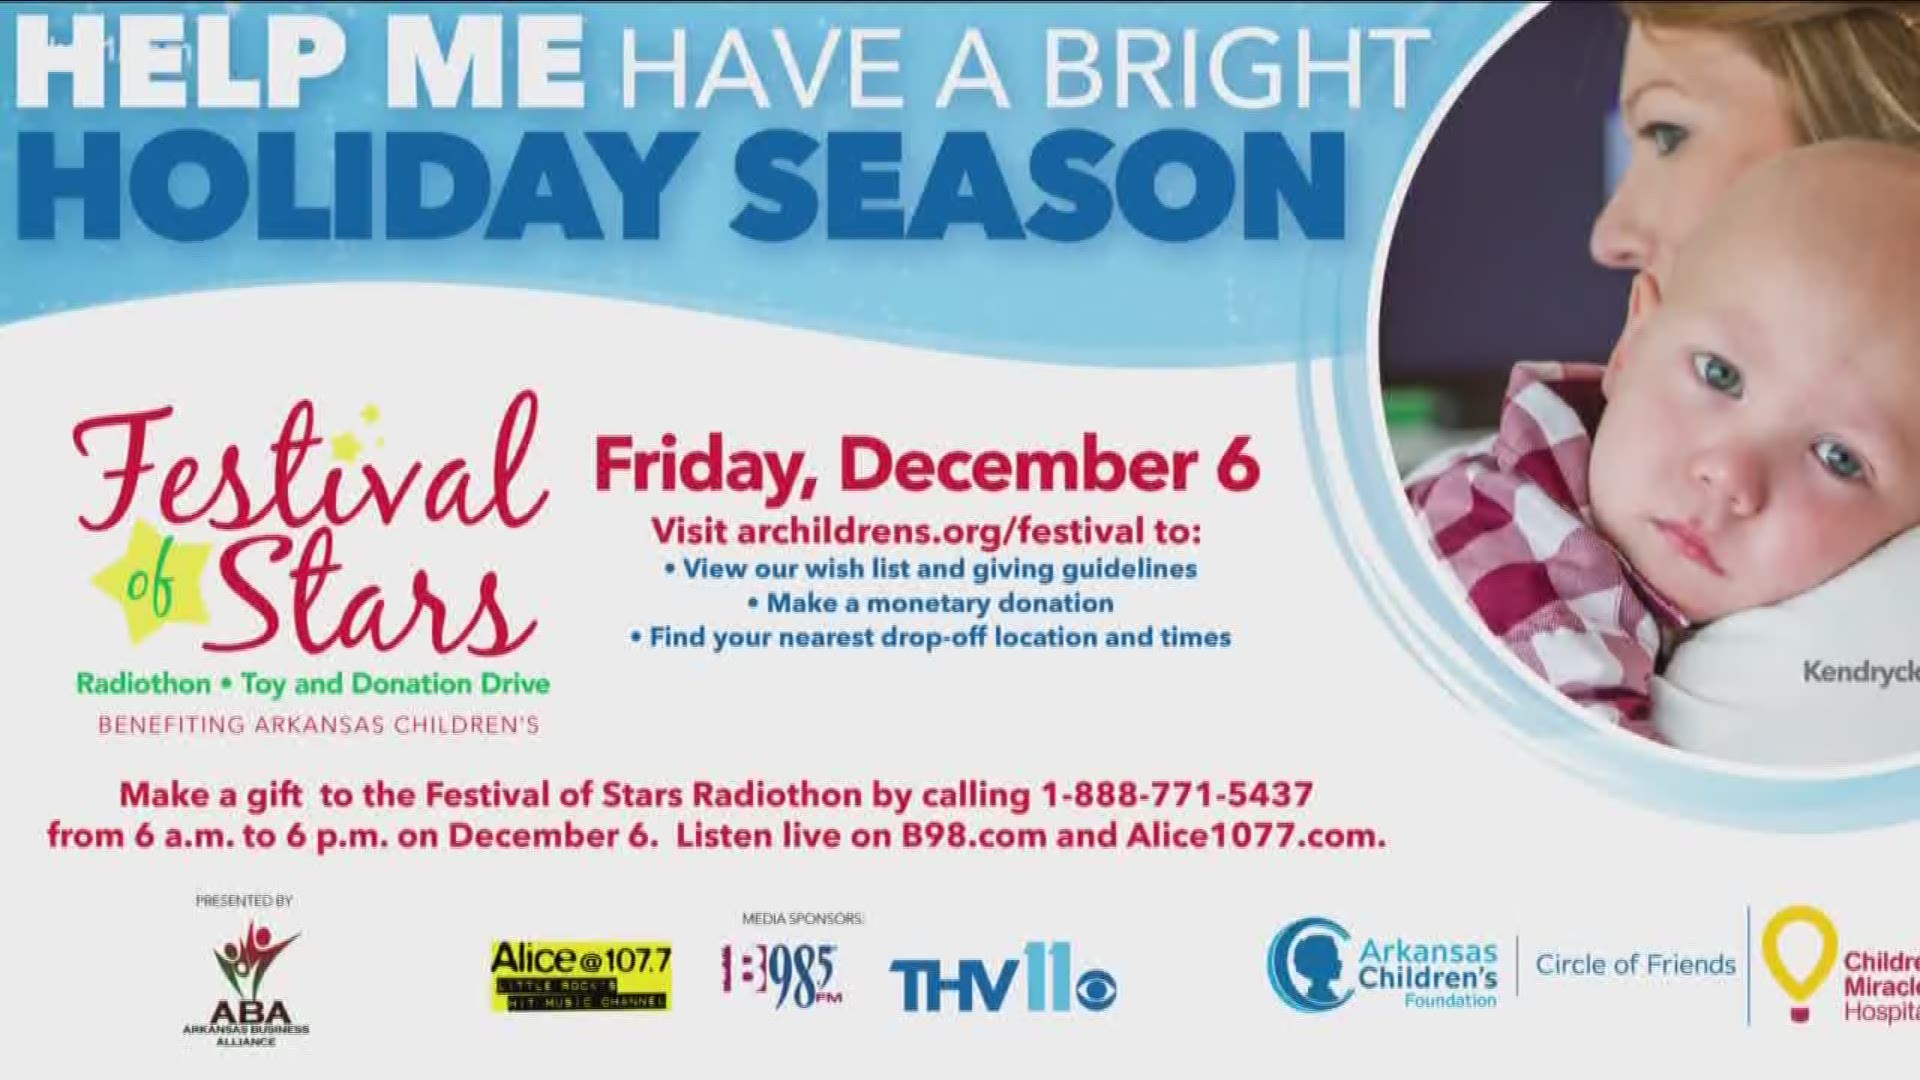 This week - you can make the holidays brighter for children in our state. That's the mission of the Festival of Stars Toy and Donation Drive and Radiothon.